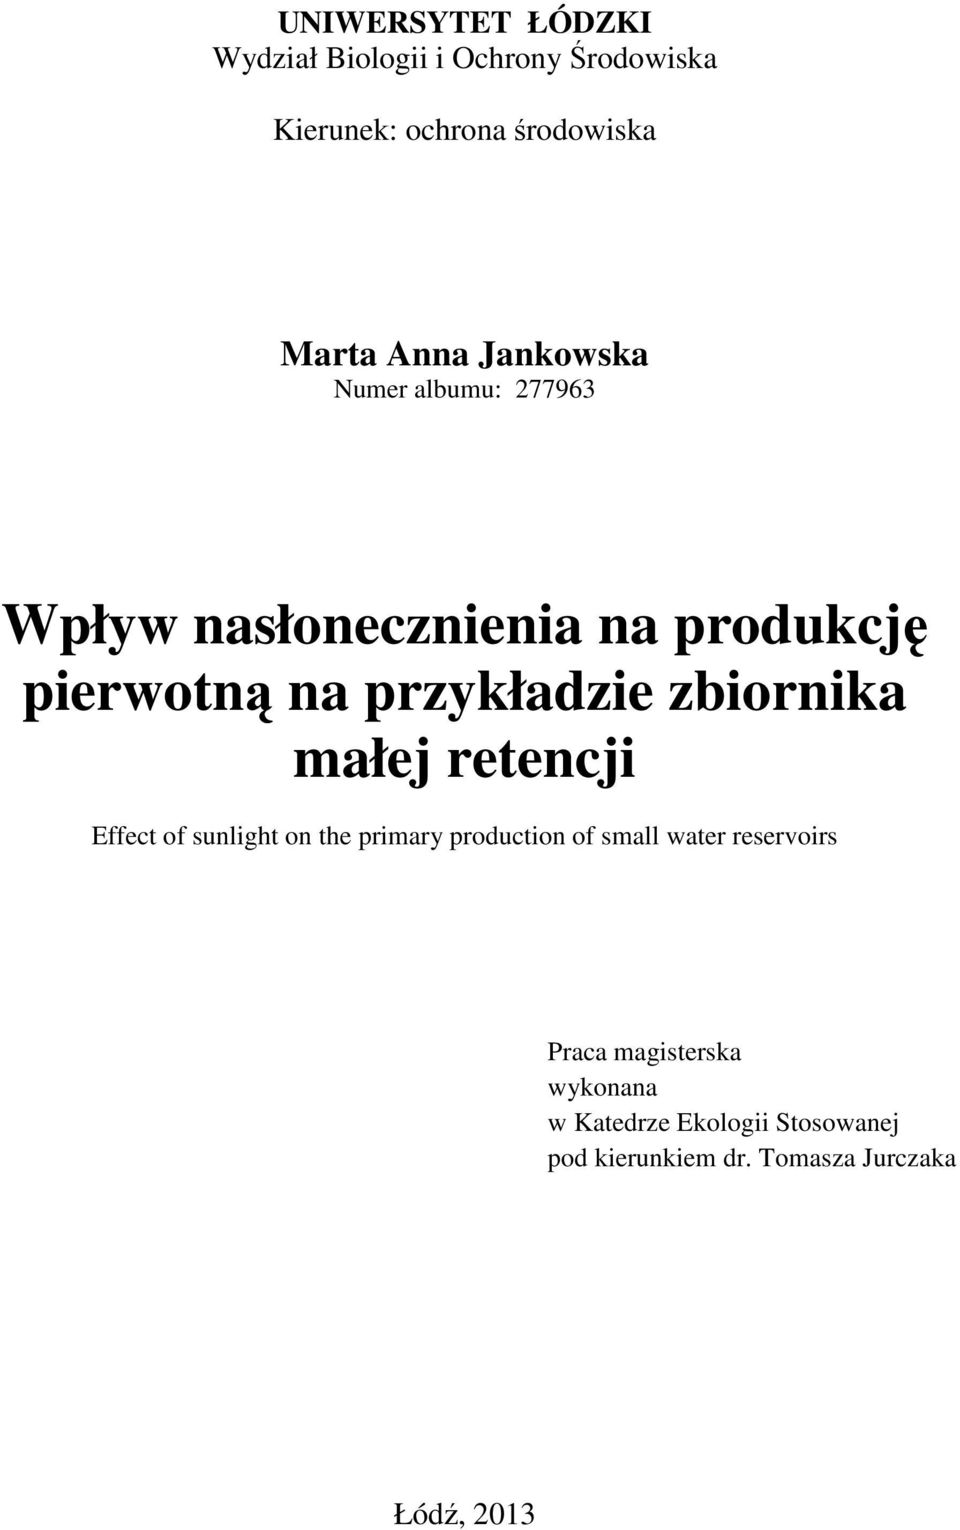 zbiornika małej retencji Effect of sunlight on the primary production of small water reservoirs